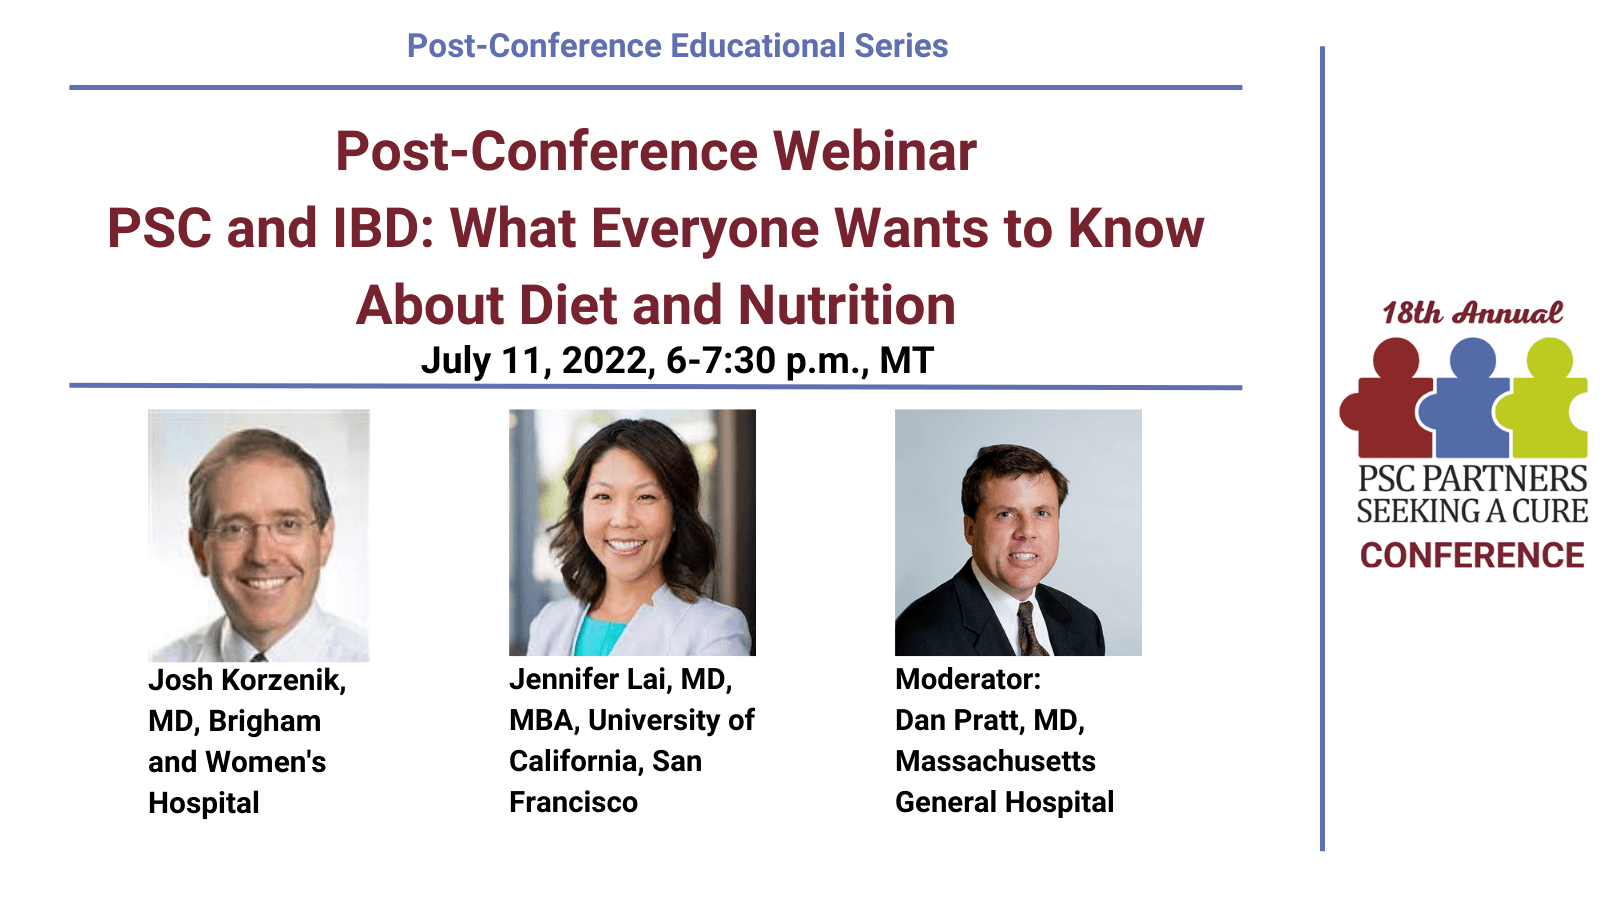 Post-Conference Webinar: PSC and IBD: What Everyone Wants to Know About Diet and Nutrition